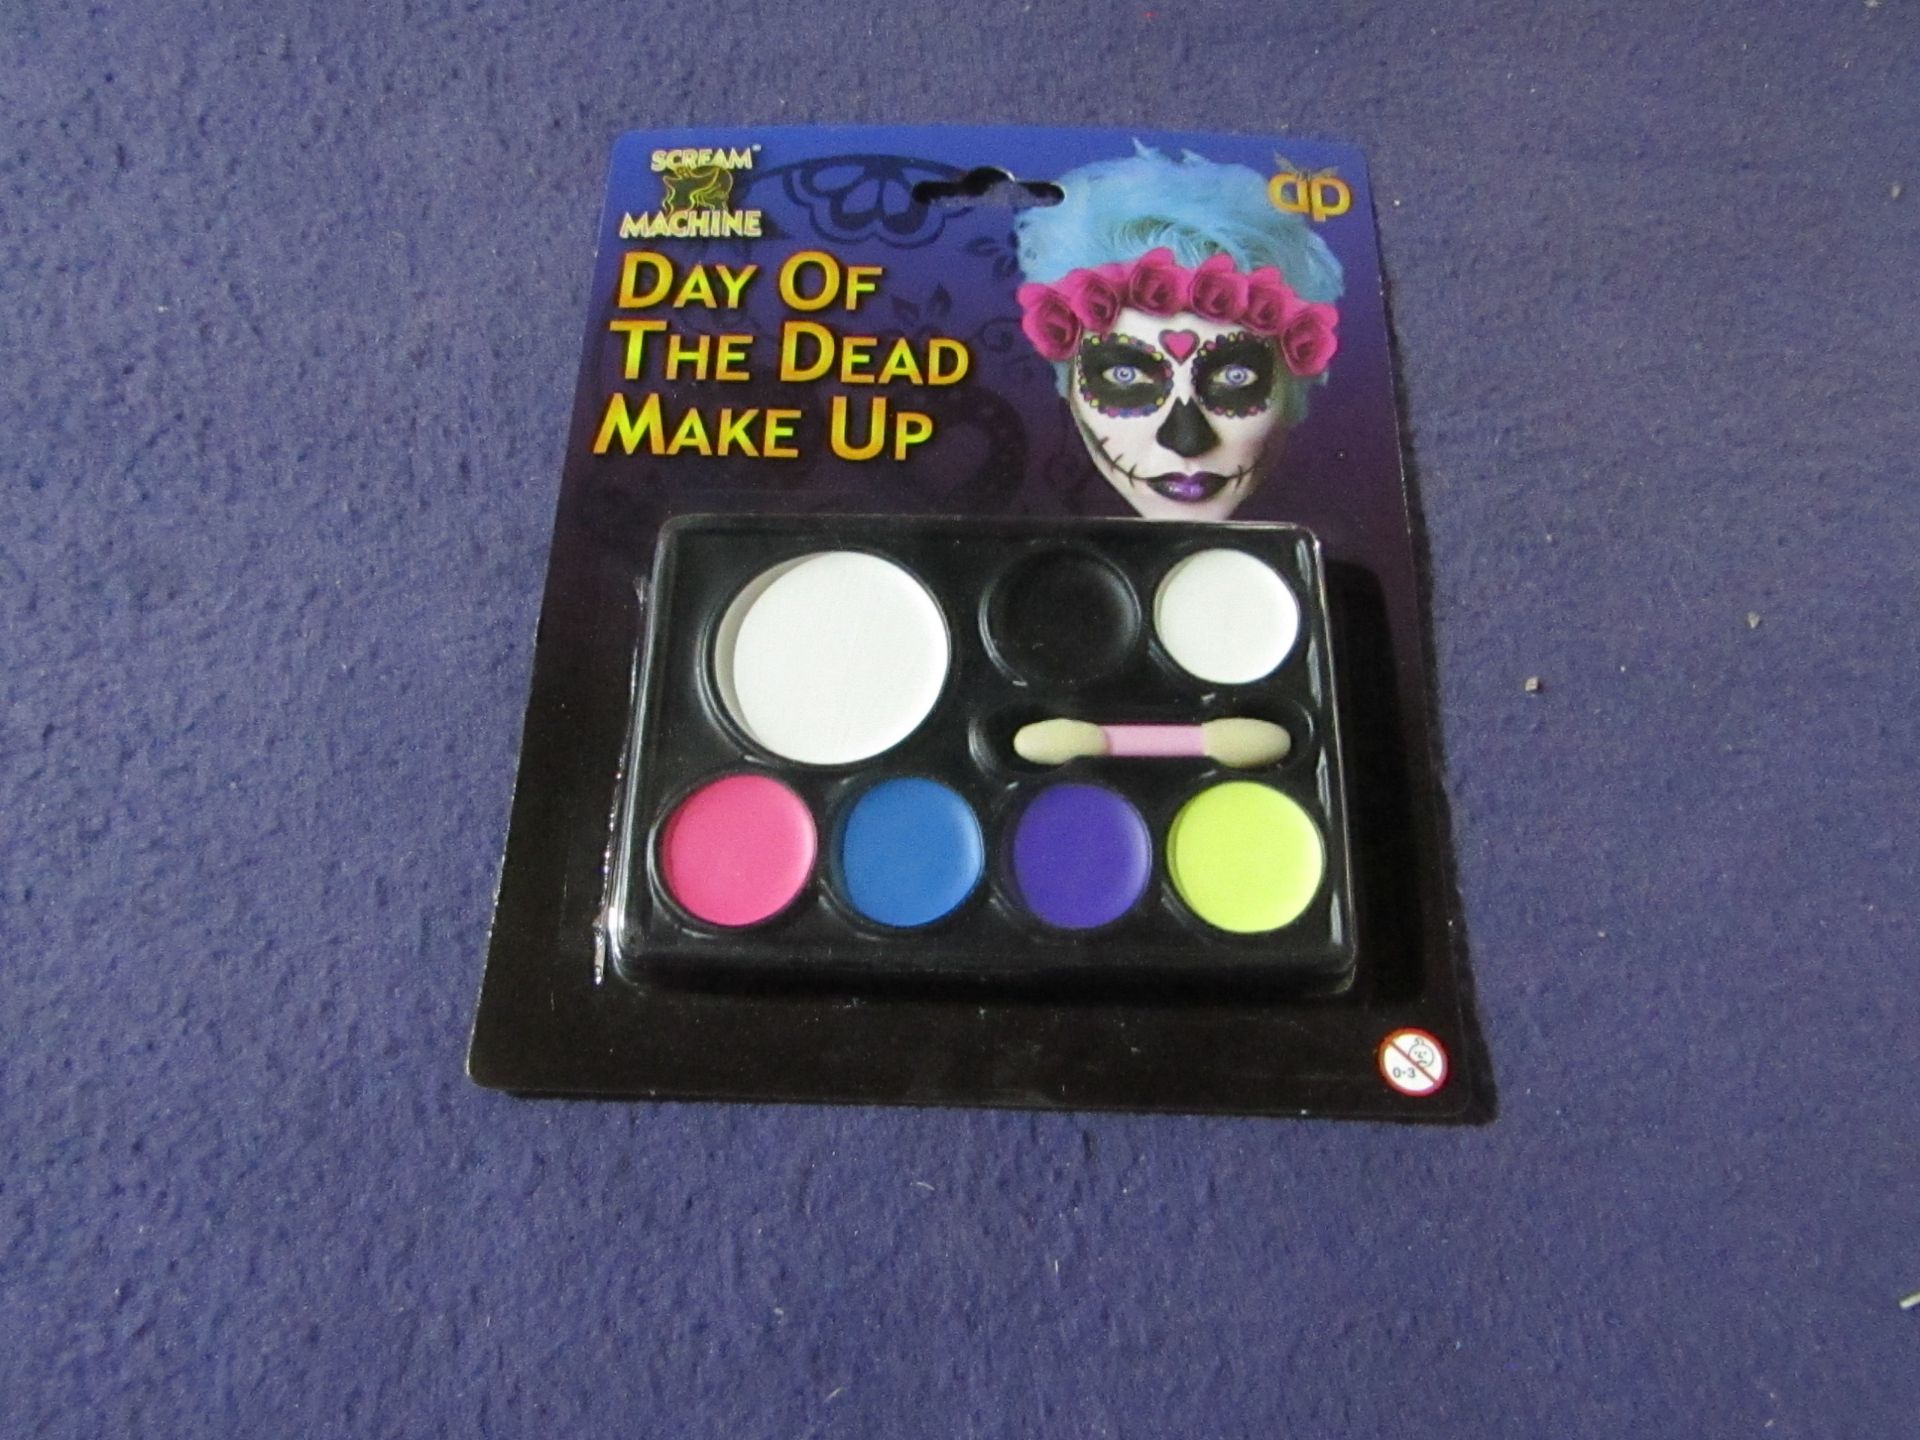 48x Scream Machine - Day Of The Dead Make-Up Kit - Unused & Boxed.